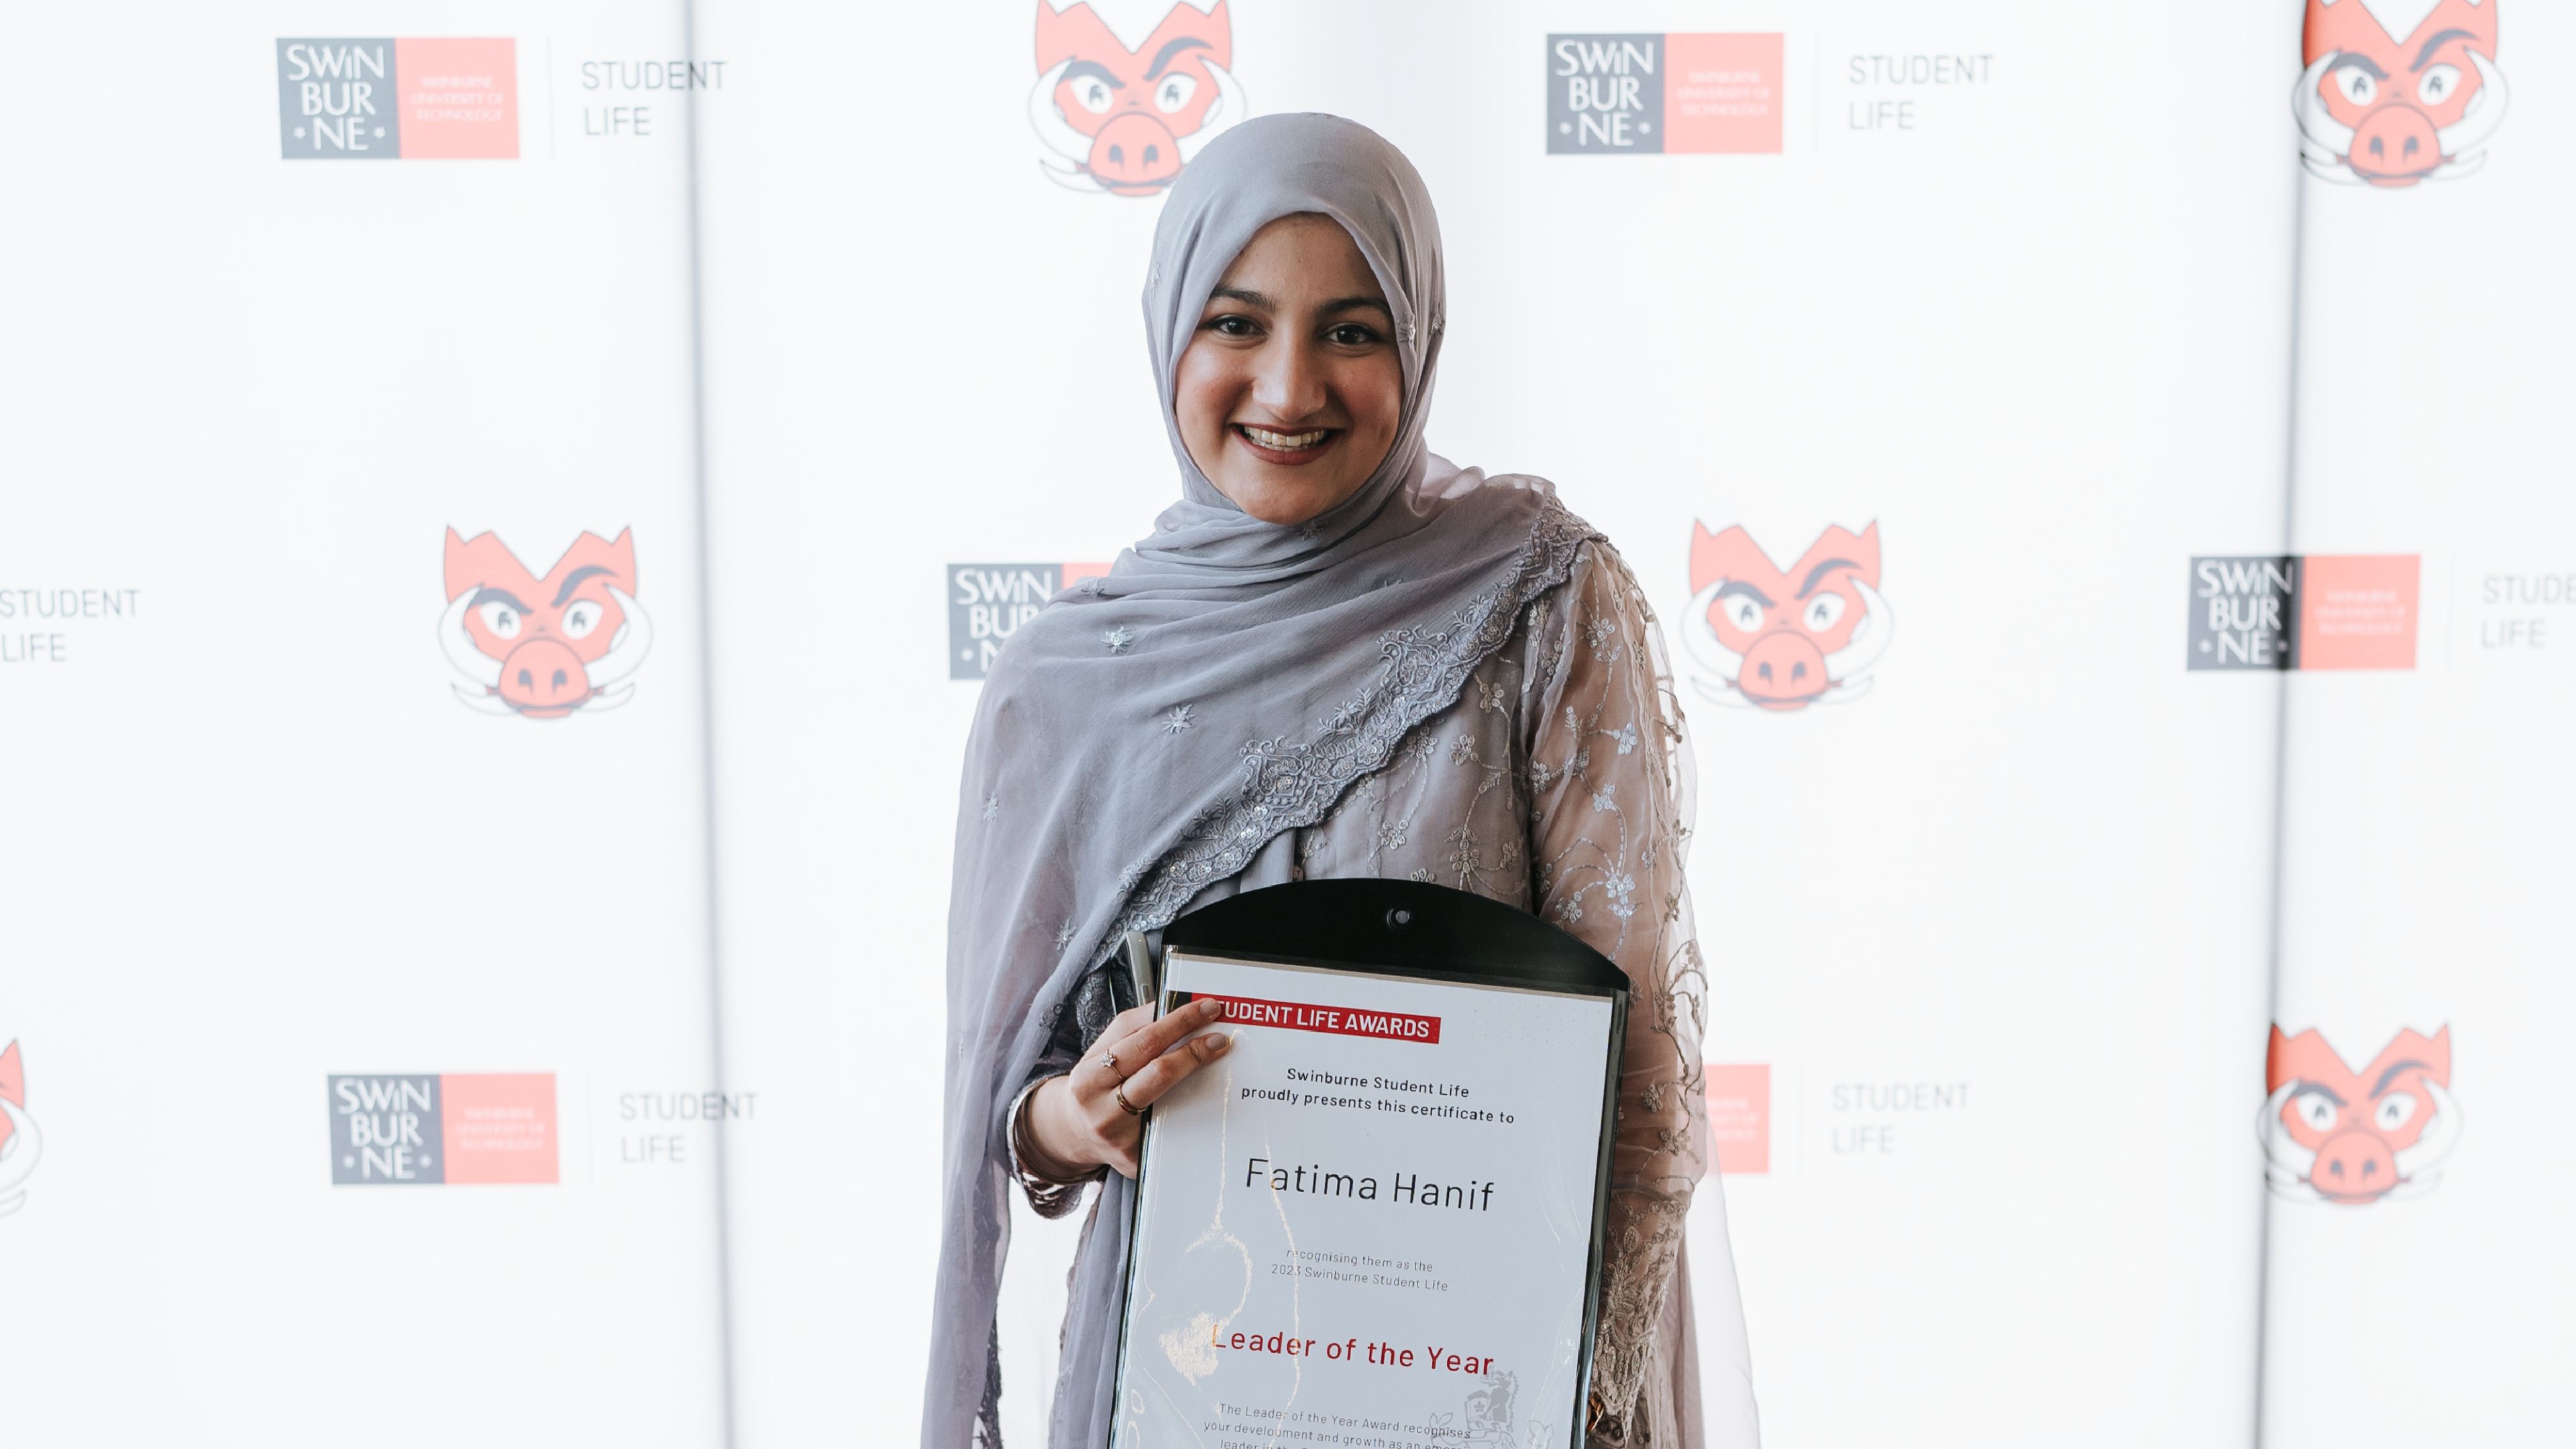 Bachelor of computer science graduate Fatima Hanif stands smiling holding a certificate for their award: leader of the year